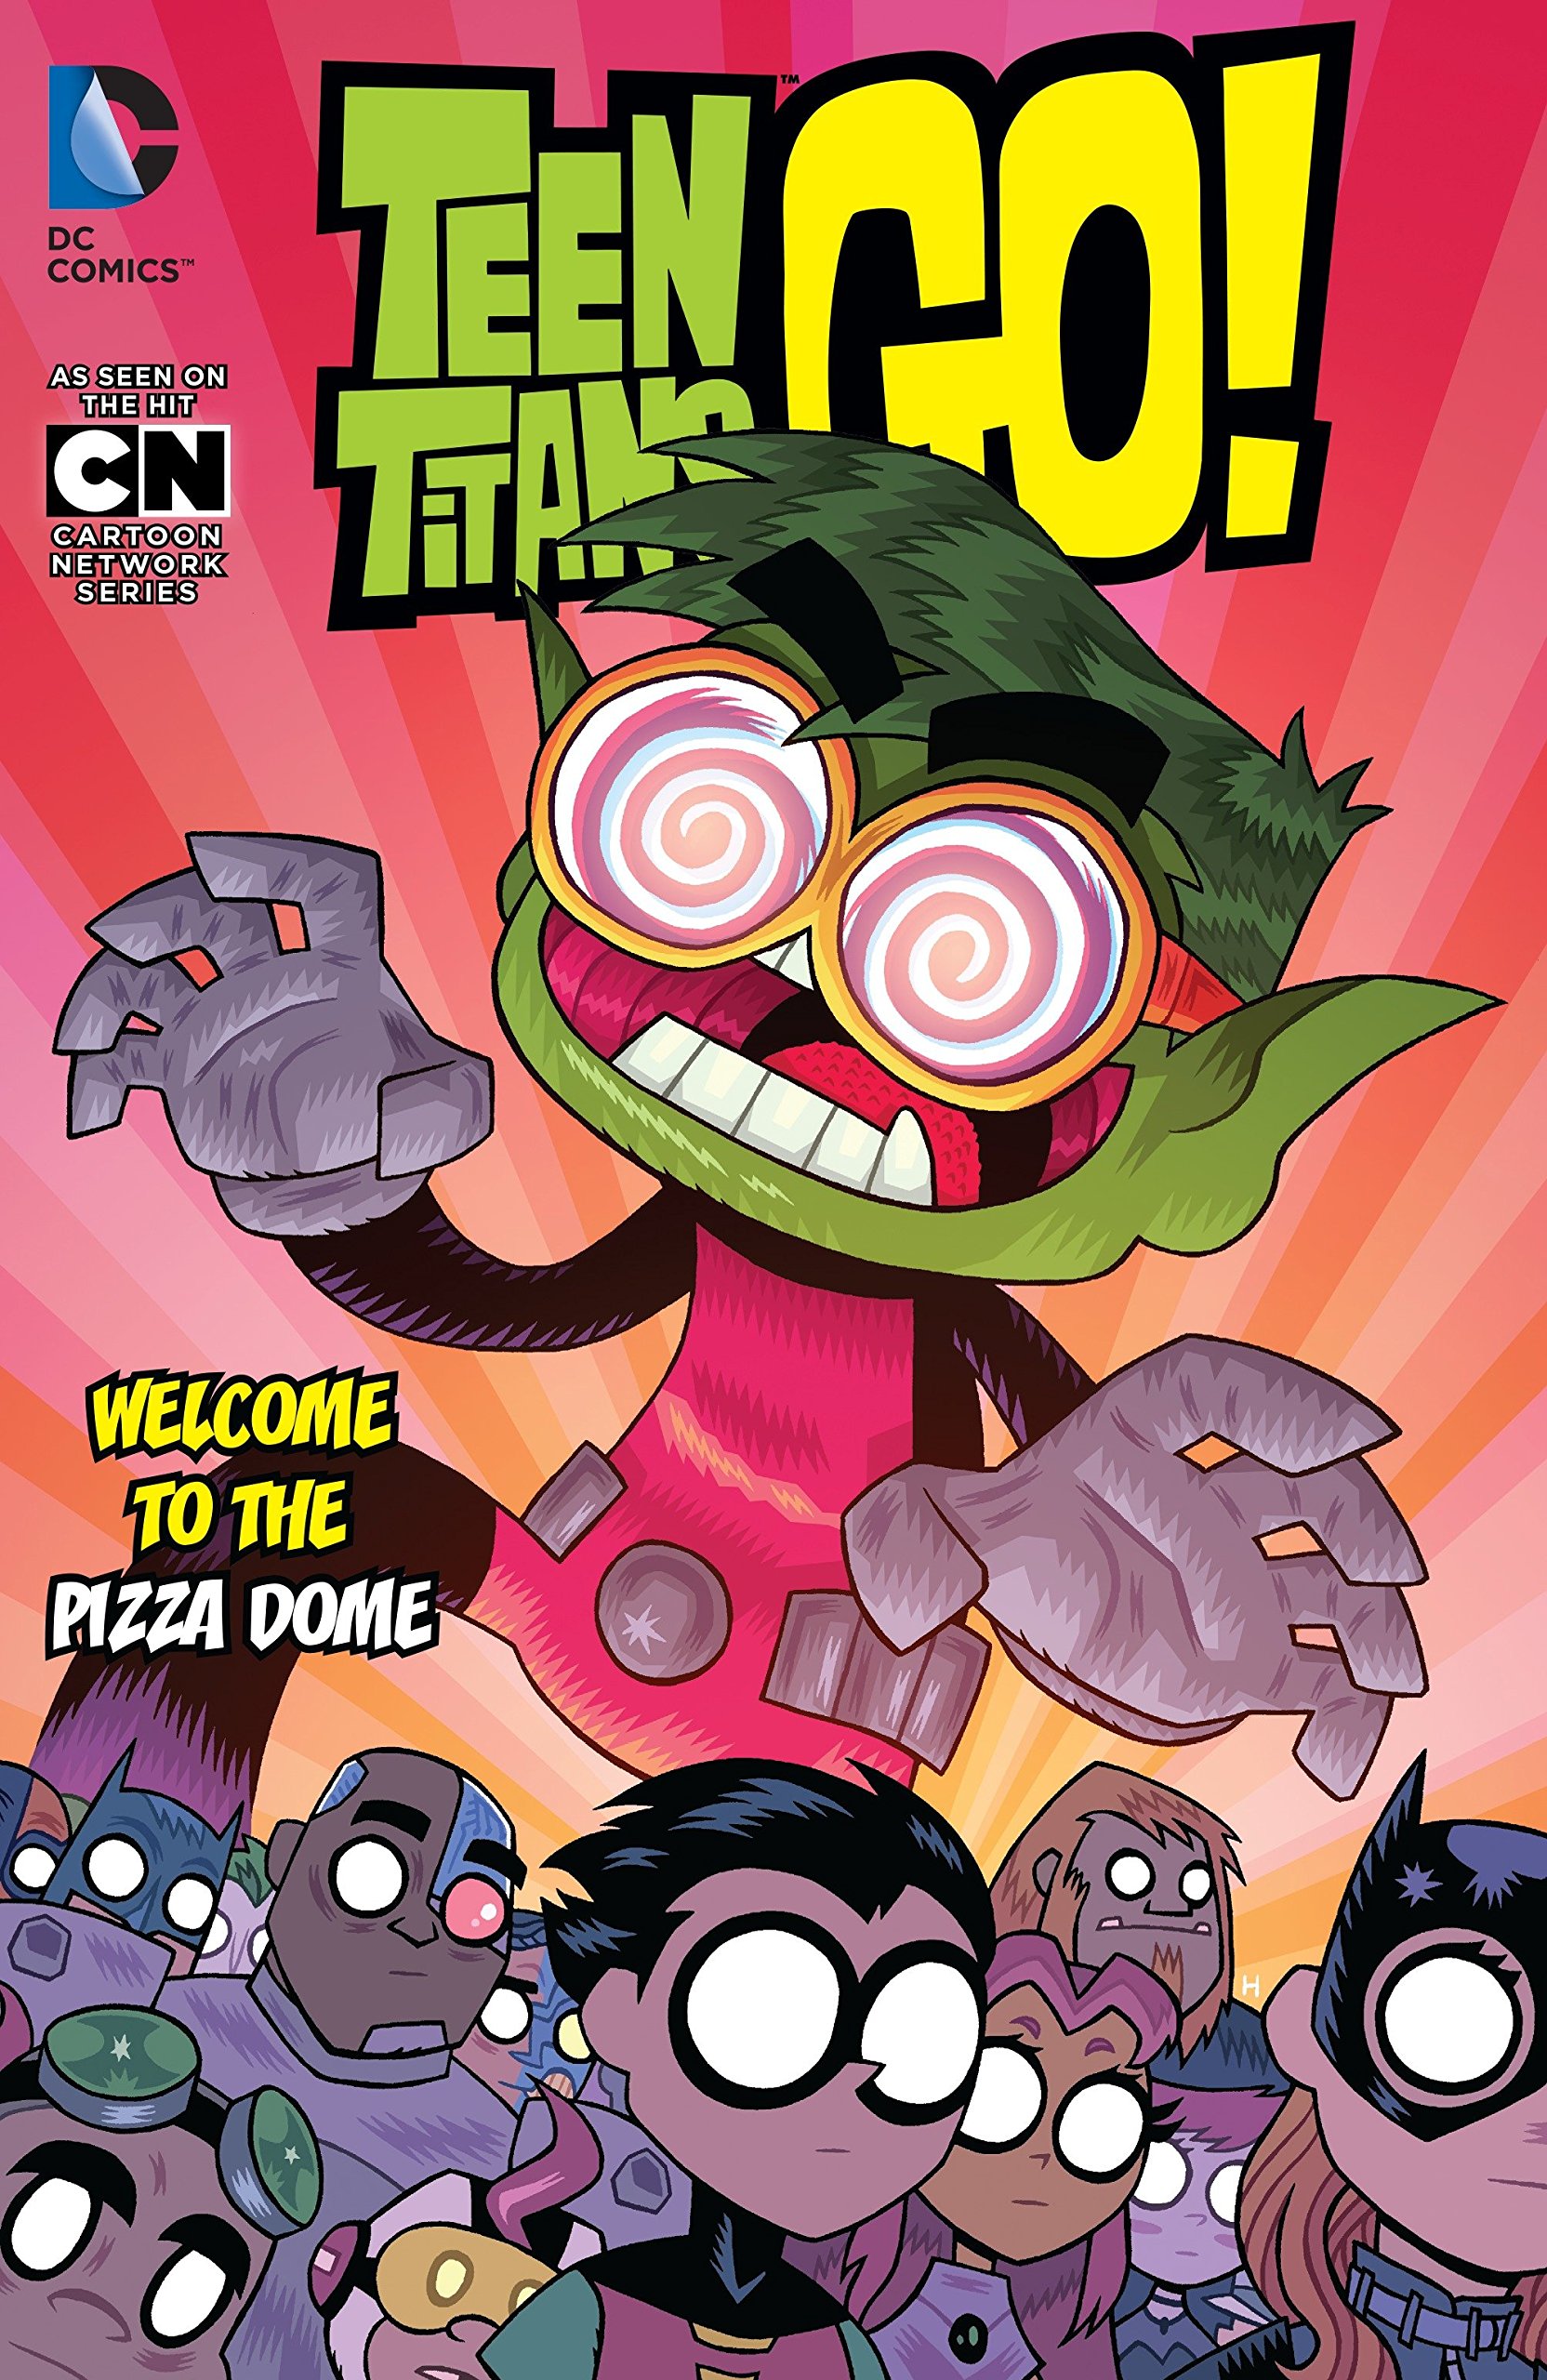 The New Teen Titans: Volume two [Book]